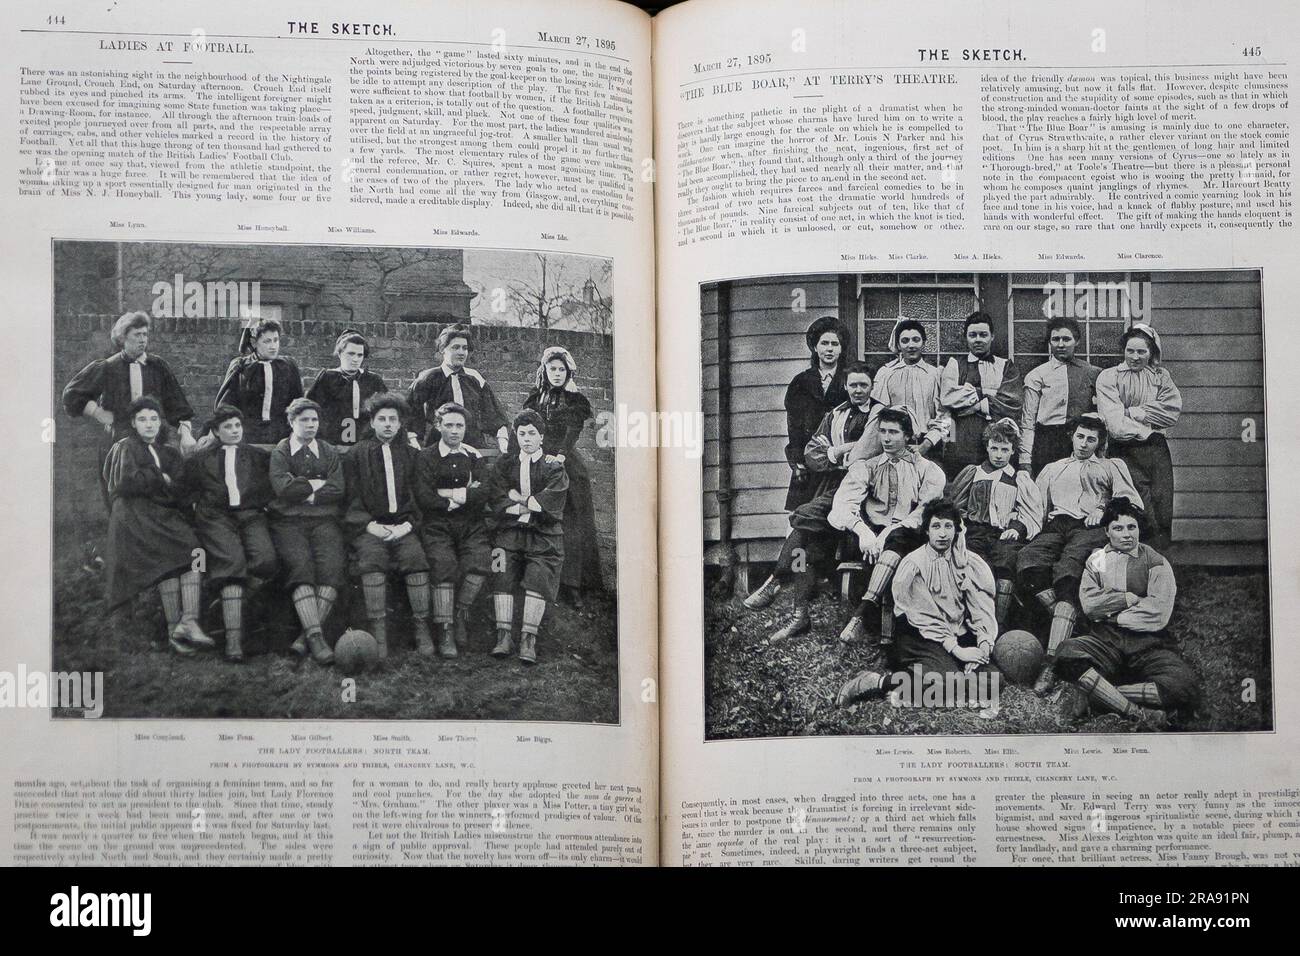 A magazine article from The Sketch on the women's North vs South football match played on March 27, 1895 - the first known organised women's football match to take place in London which drew a crowd of approximately 10,000 with the North team winning by seven goals to one - one of the millions of items held in the collection at the London Metropolitan Archives (LMA) in central London. With over 100km of books, maps, photographs, films and documents dating back to 1067 held in the strong rooms, the LMA is the principal local government archive repository for the Greater London area, including t Stock Photo